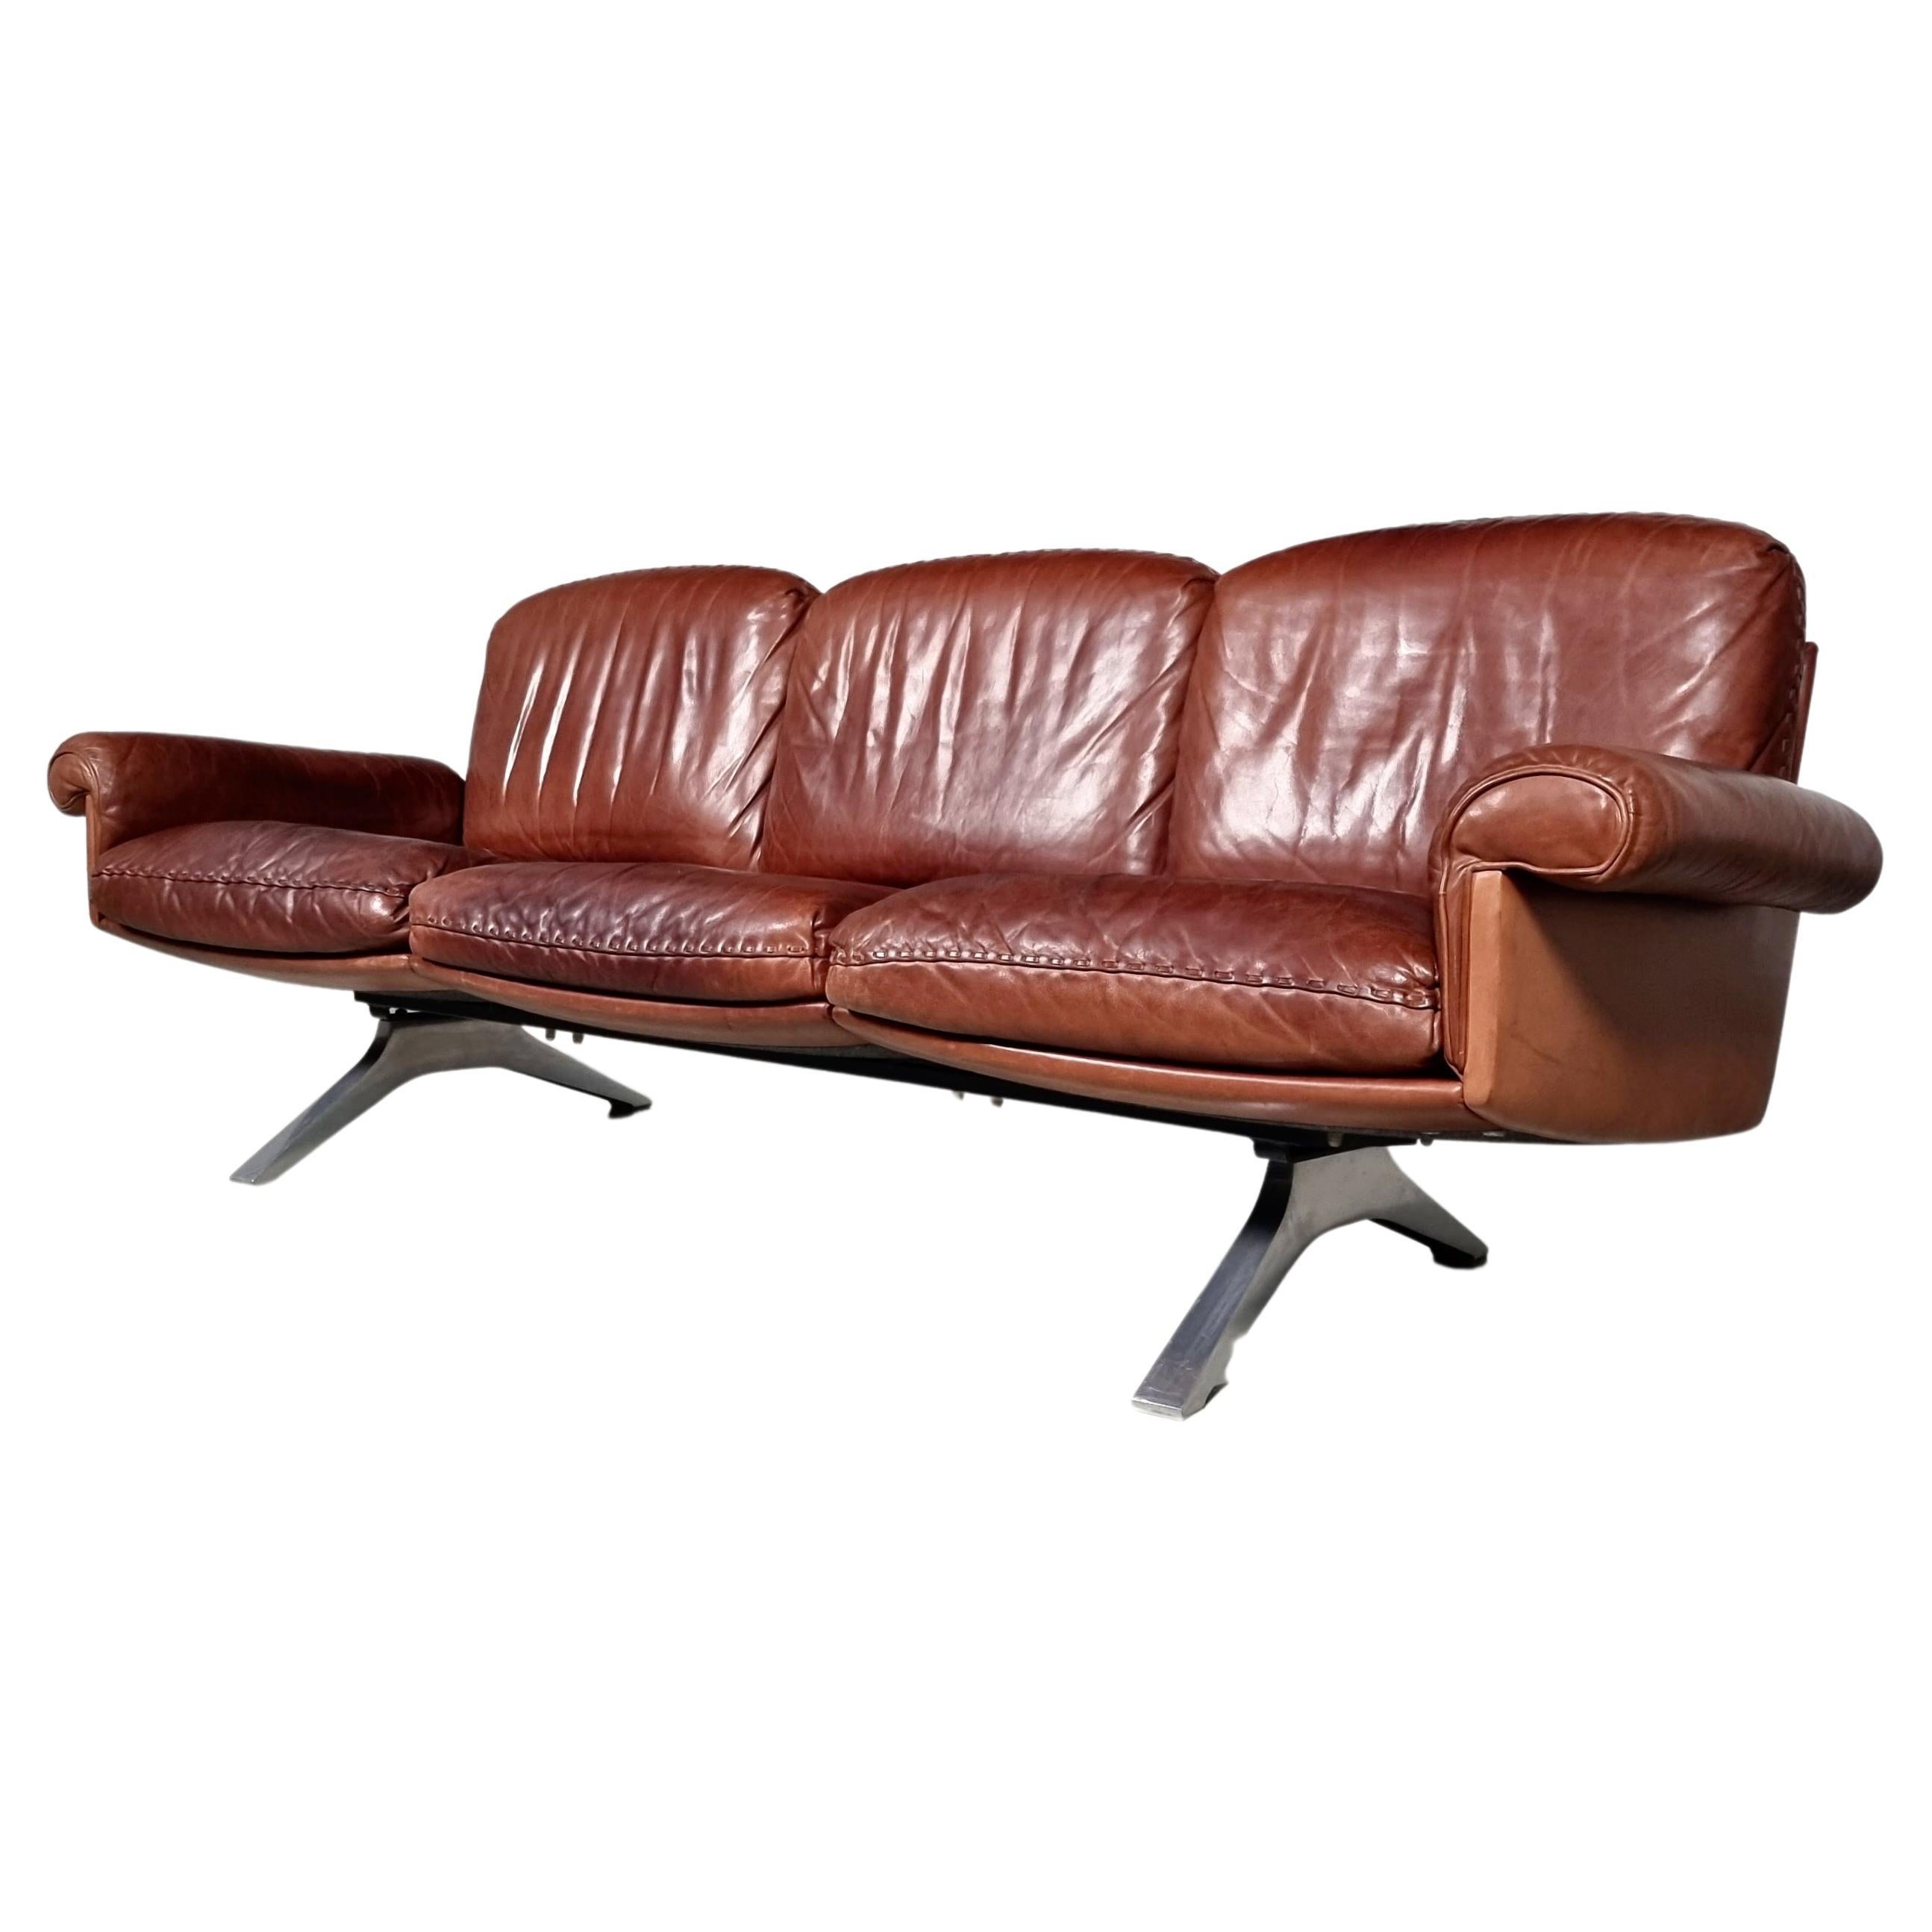 De Sede DS-31 3-Seater Sofa in Light Brown Leather, 1970s For Sale